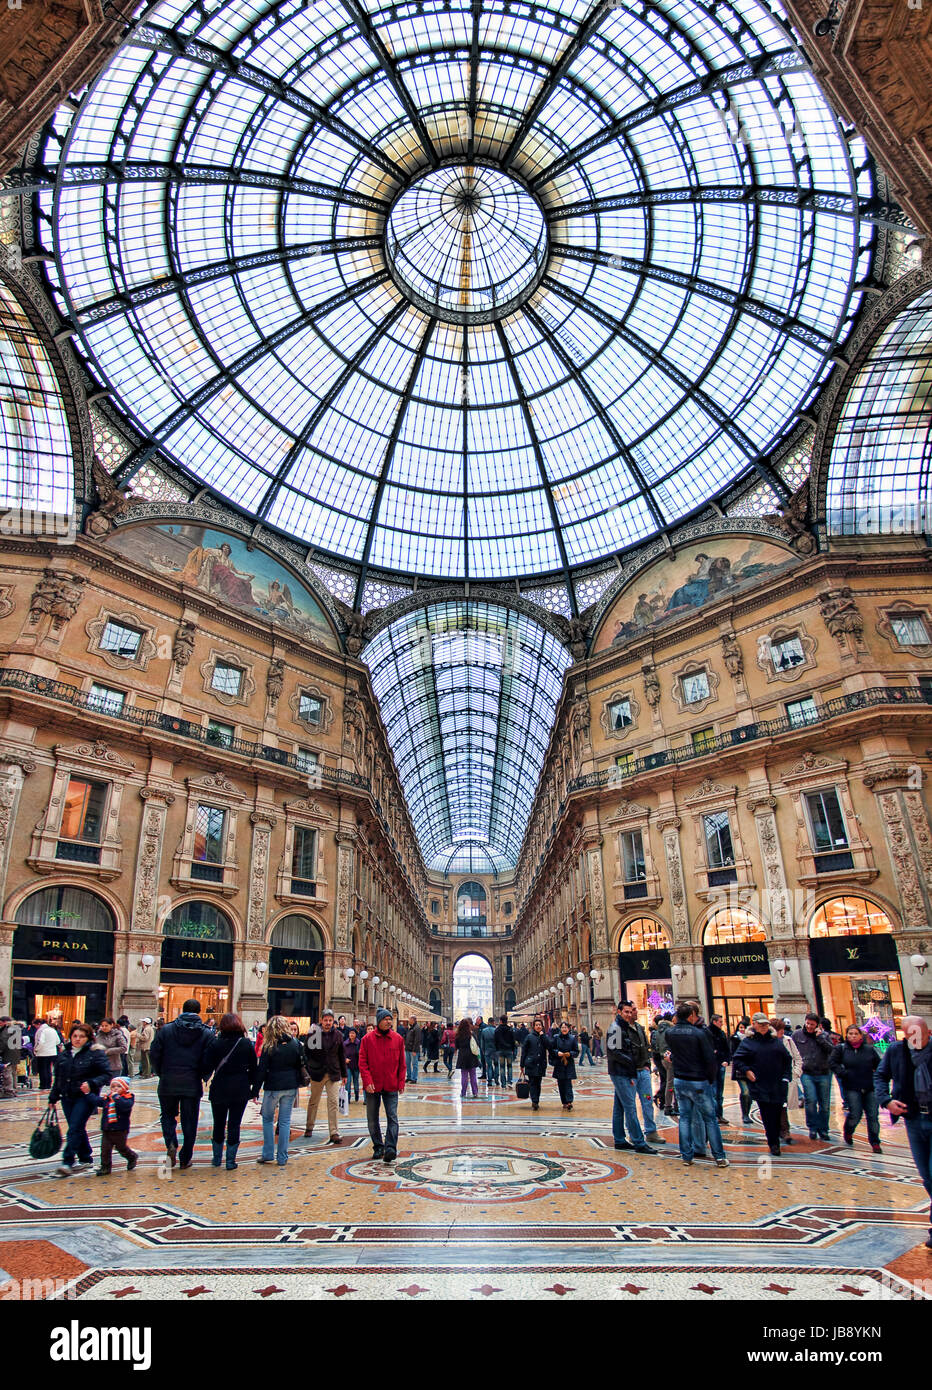 MILAN - NOVEMBER 15: Galleria Vittorio Emanuele II vertical oriented image  - the oldest shopping mall housed within a four-storey and includes shops,  restaurants and bars. Galleria named after first king of